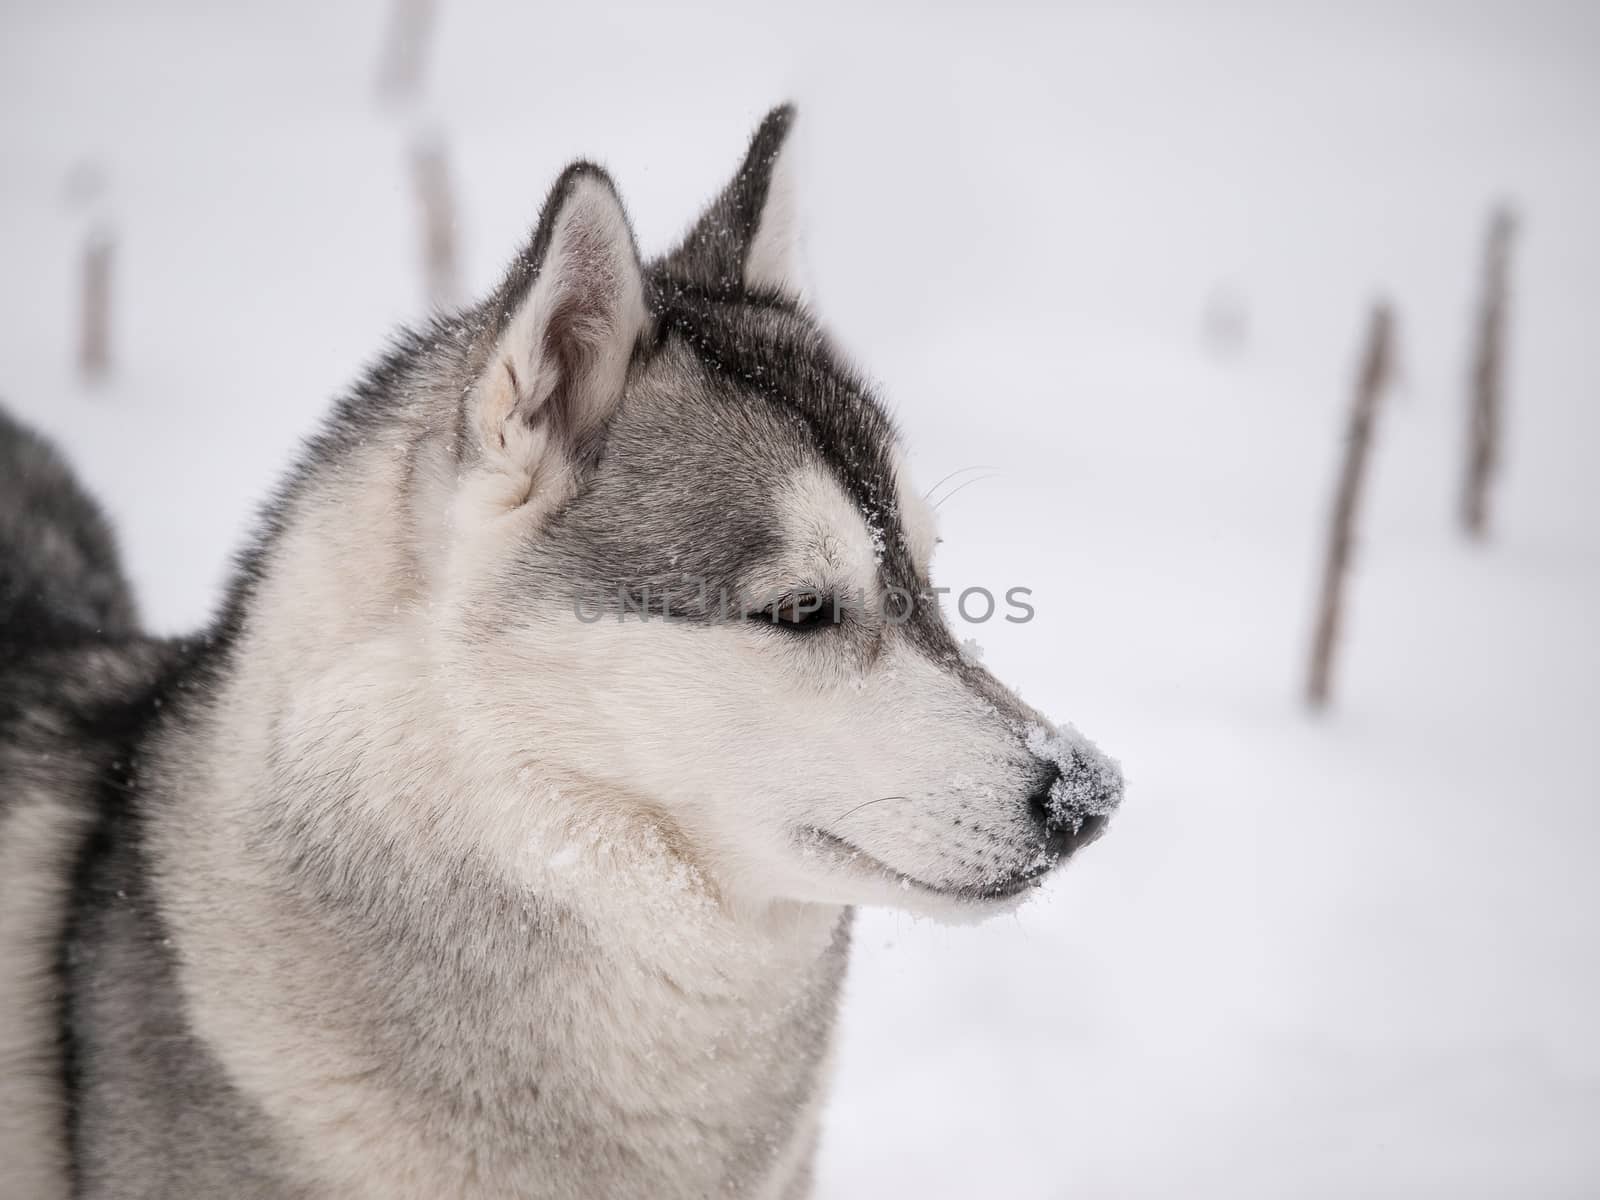 Husky dog outdoors on a snowy winter day
